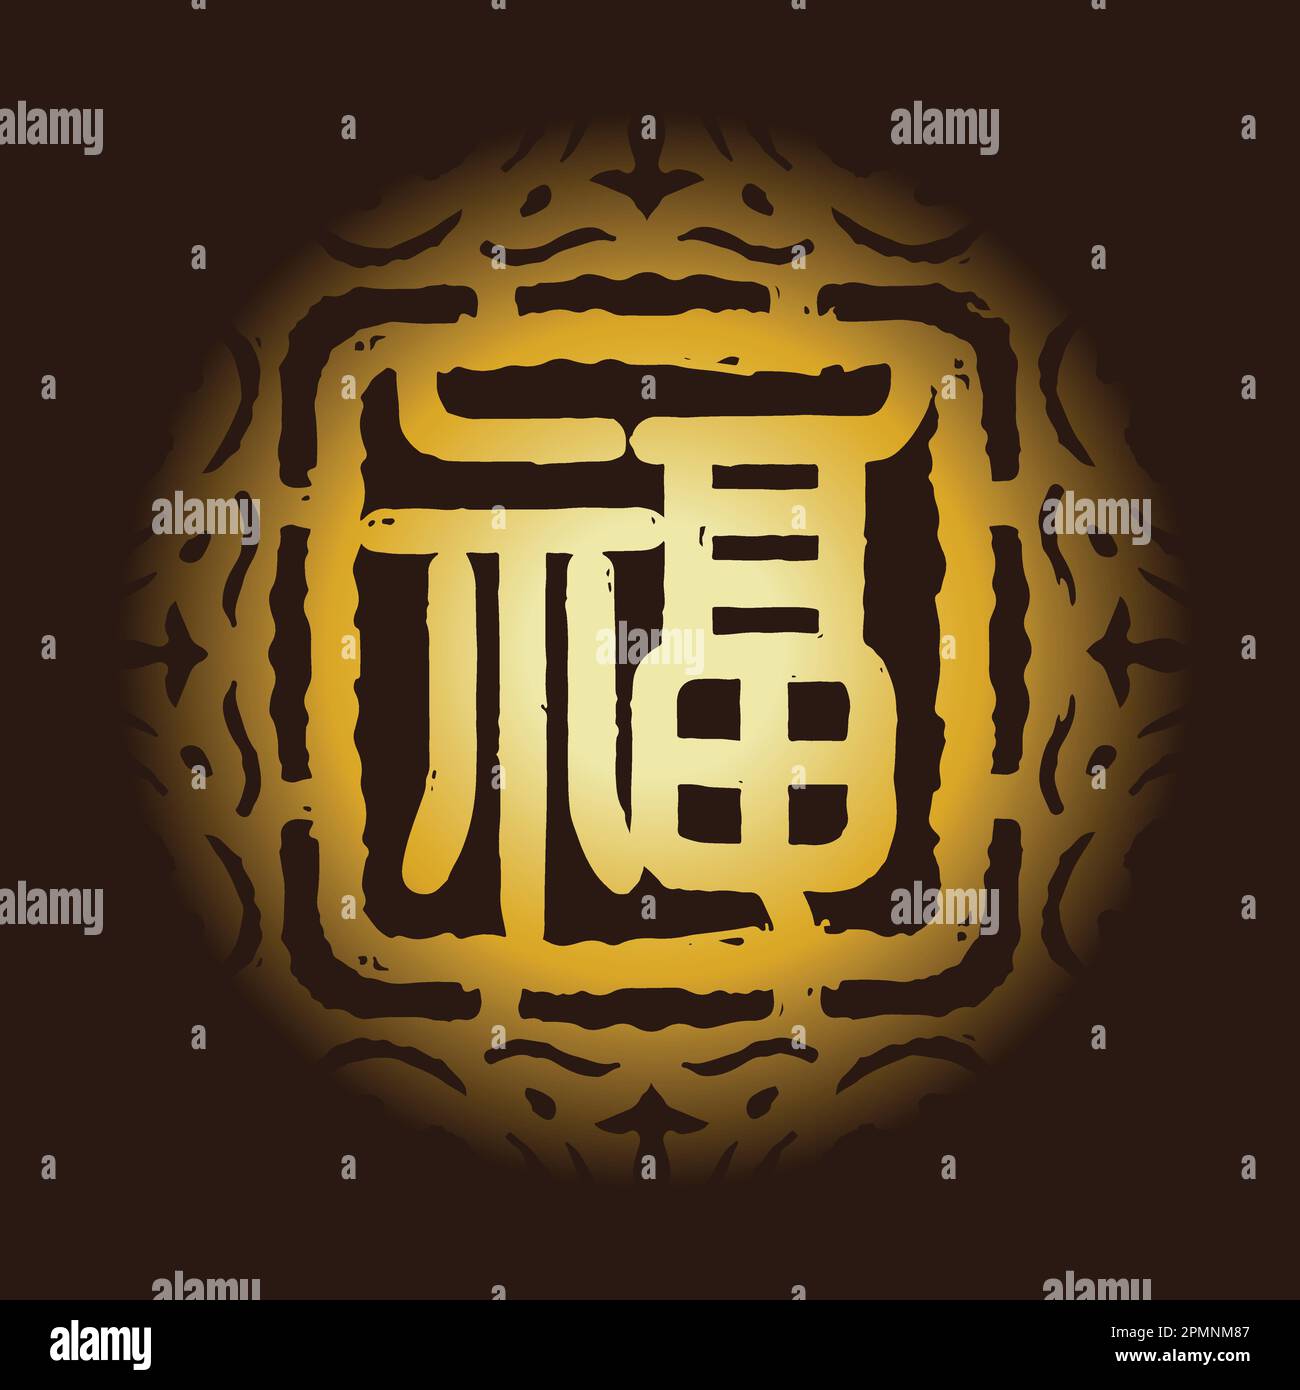 Traditional chinese patterns with blessing wording as design elements. Translation: blessing, good fortune Stock Vector